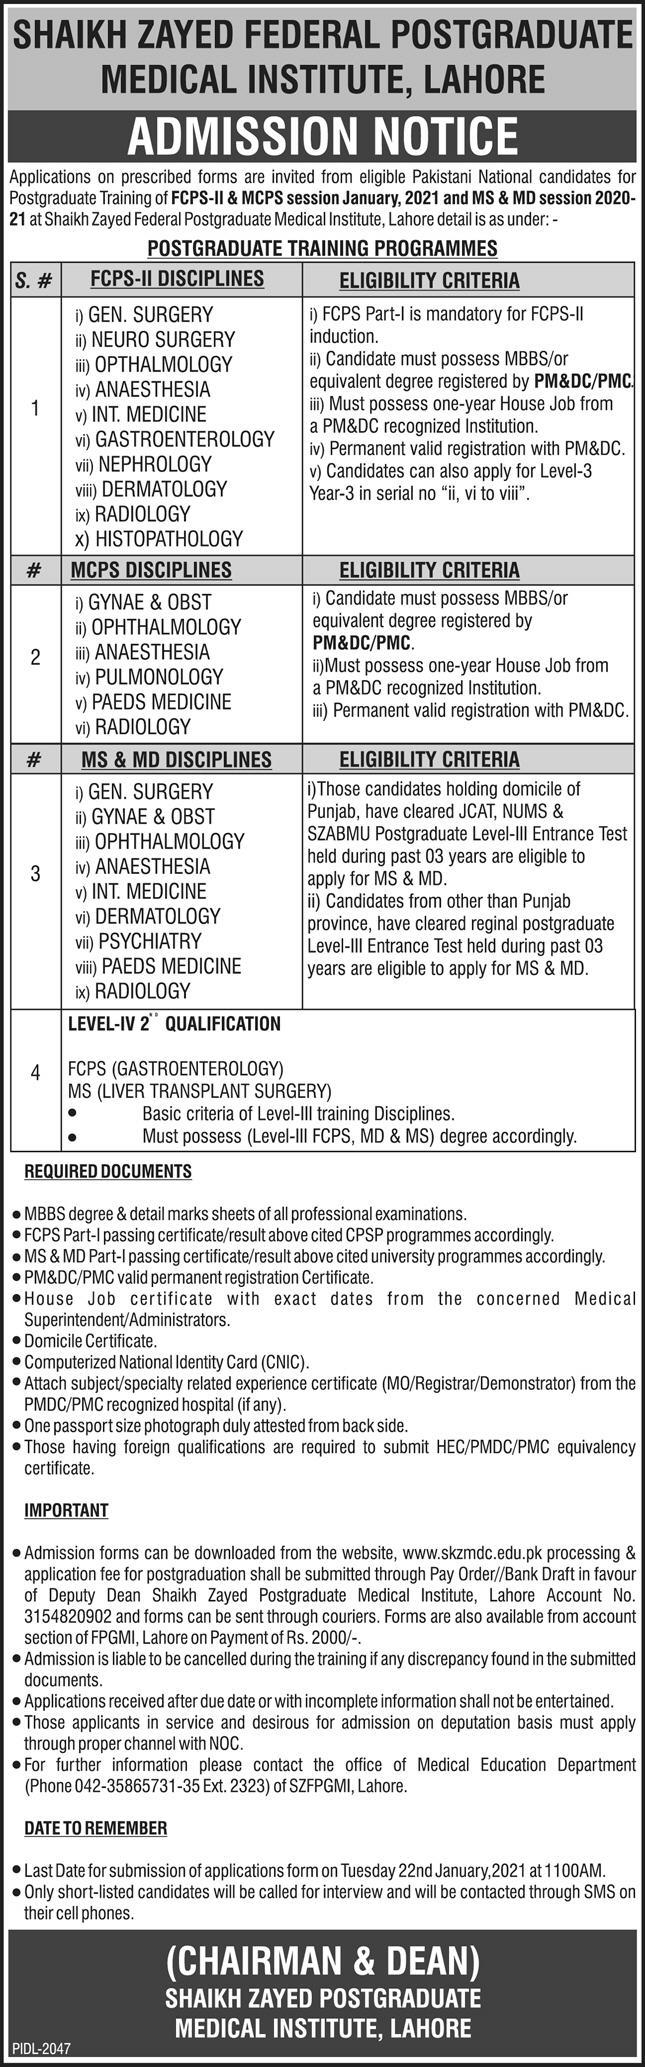 SHEIKH ZAYED FEDERAL POSTGRADUATE MEDICAL INSTITUTE LAHORE ADMISSION 2021